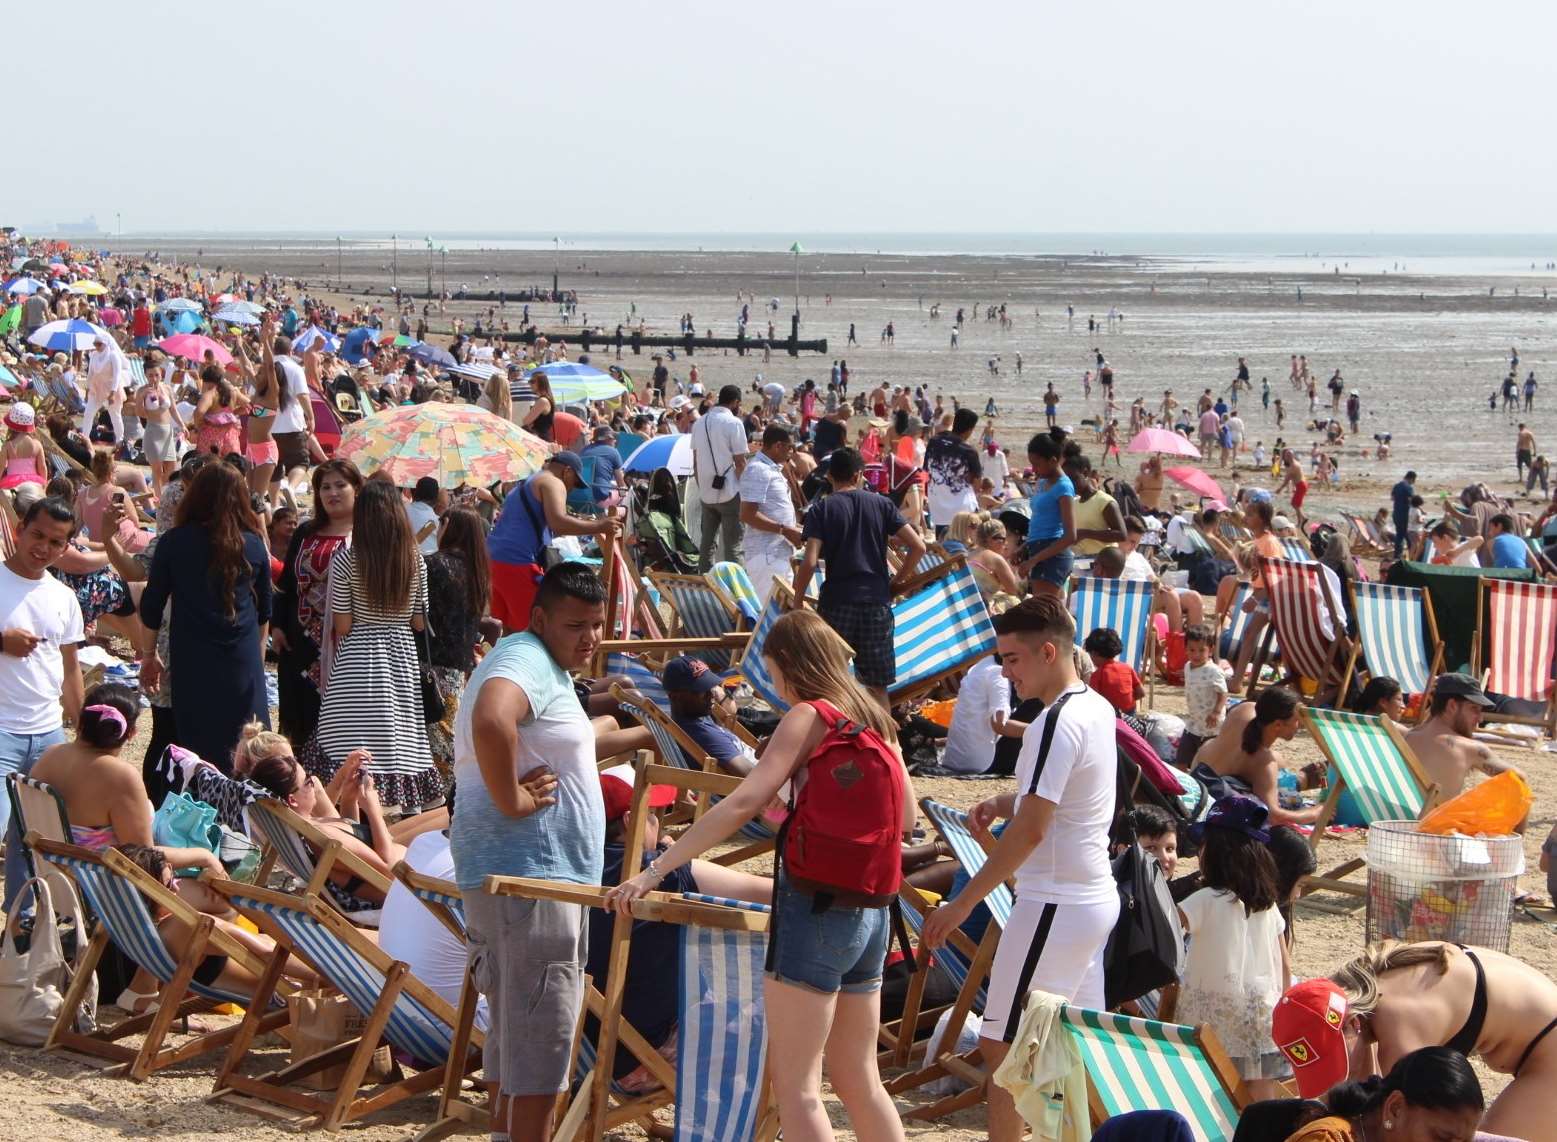 Southend: Packed beaches with plenty of deckchairs to hire